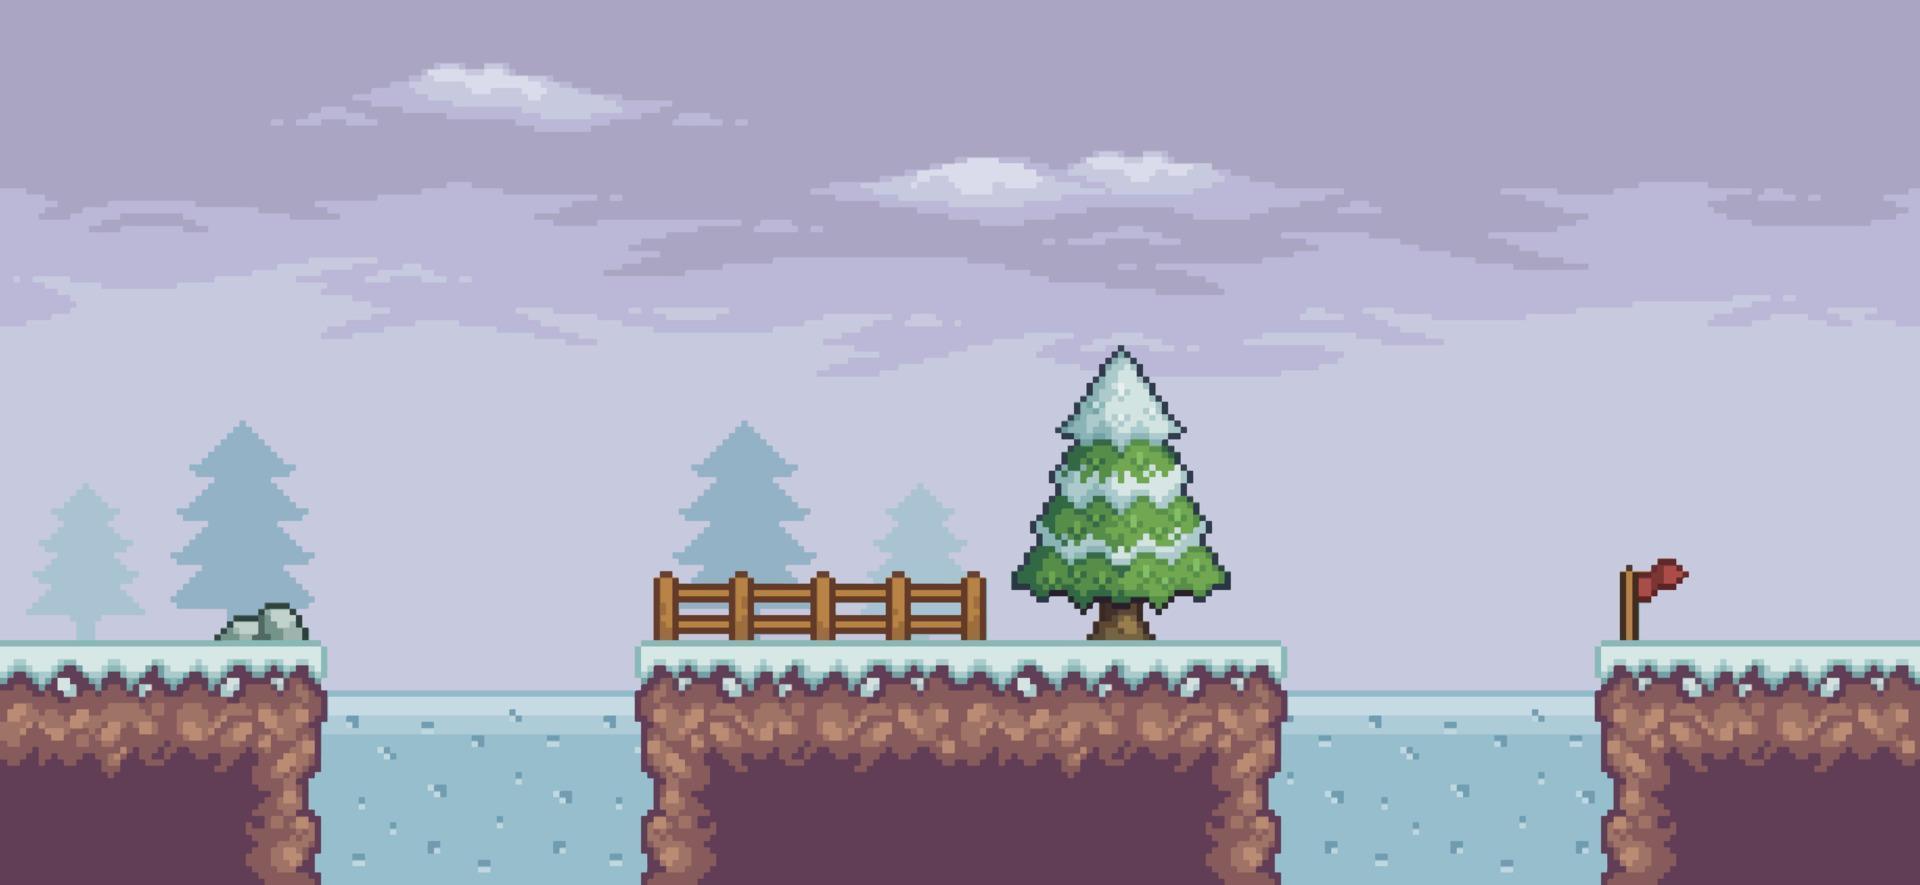 Pixel art game scene in snow with pine trees, bridge, fence, frozen lake and clouds 8 bit vector background